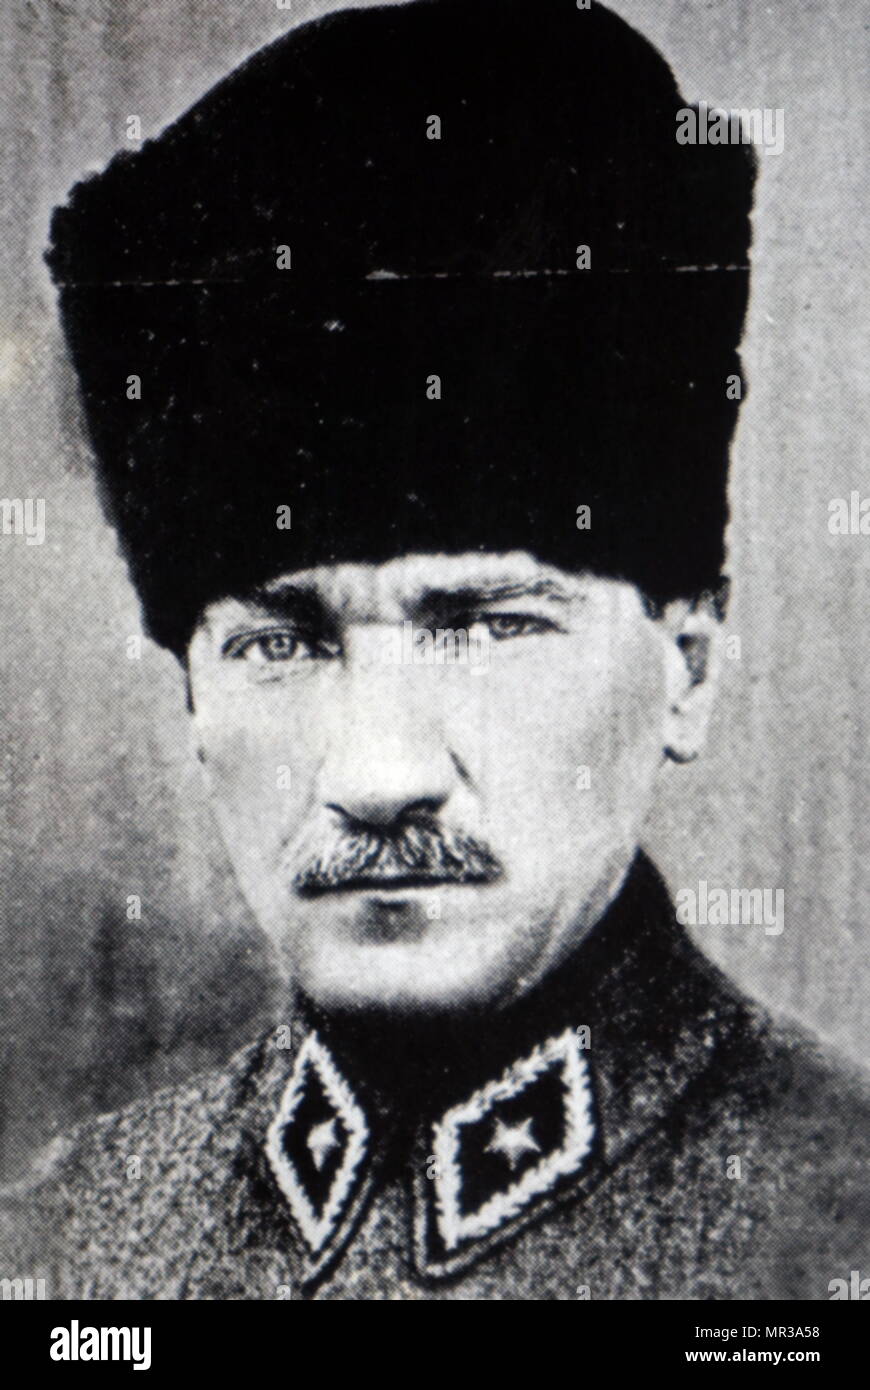 Photographic portrait of Mustafa Kemal Atatürk (1881-1938) a Turkish army officer, revolutionary, and founder of the Republic of Turkey, serving as its first President. Dated 20th century Stock Photo